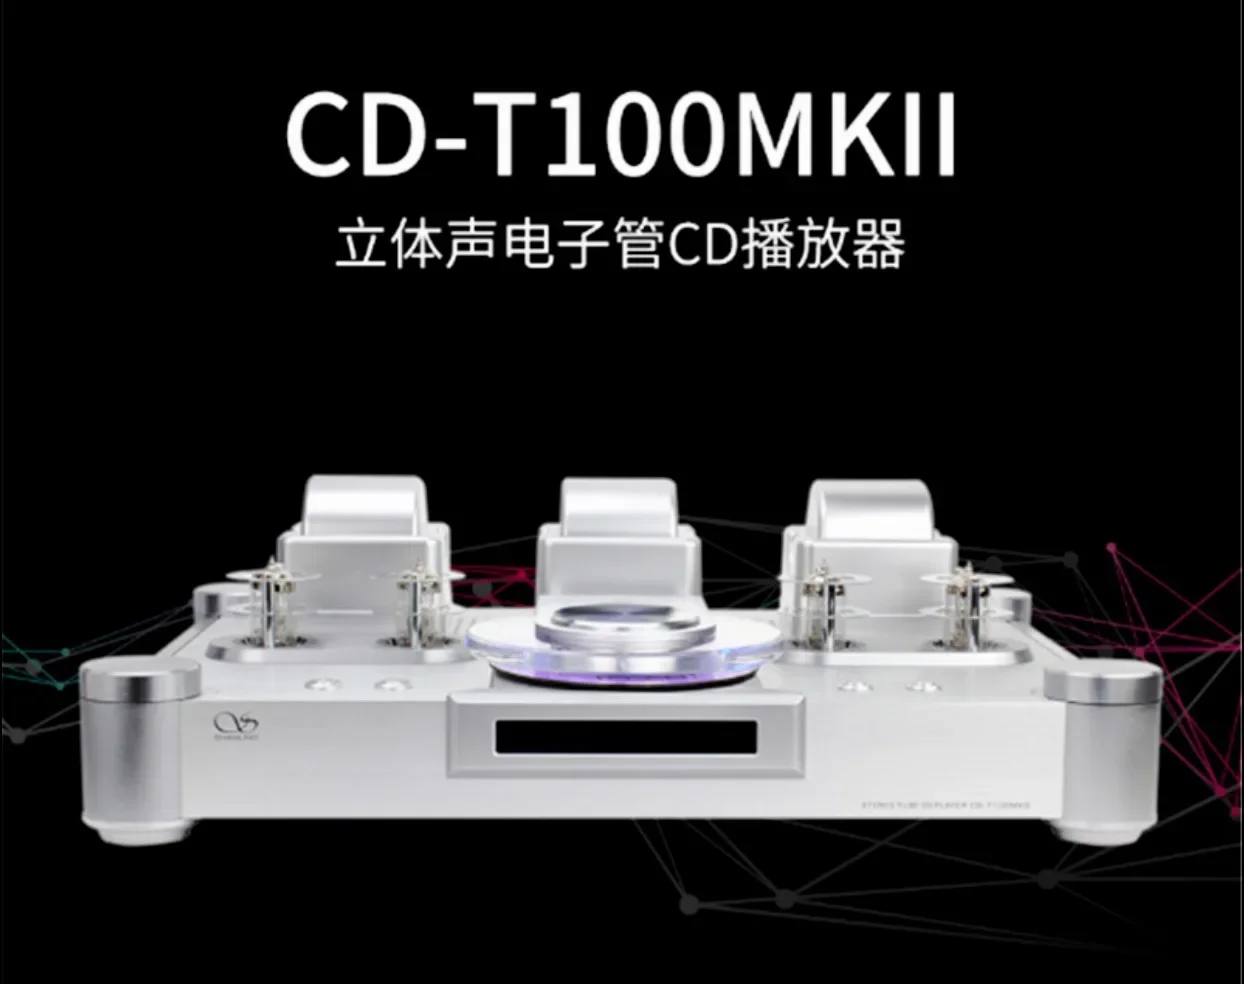 

Shanling CD-T100 MKII Balanced CD Player Turntable HIFI EXQUIS Bluetooth 5.0USB DSD Decoder Preamp Limited Edition with remote